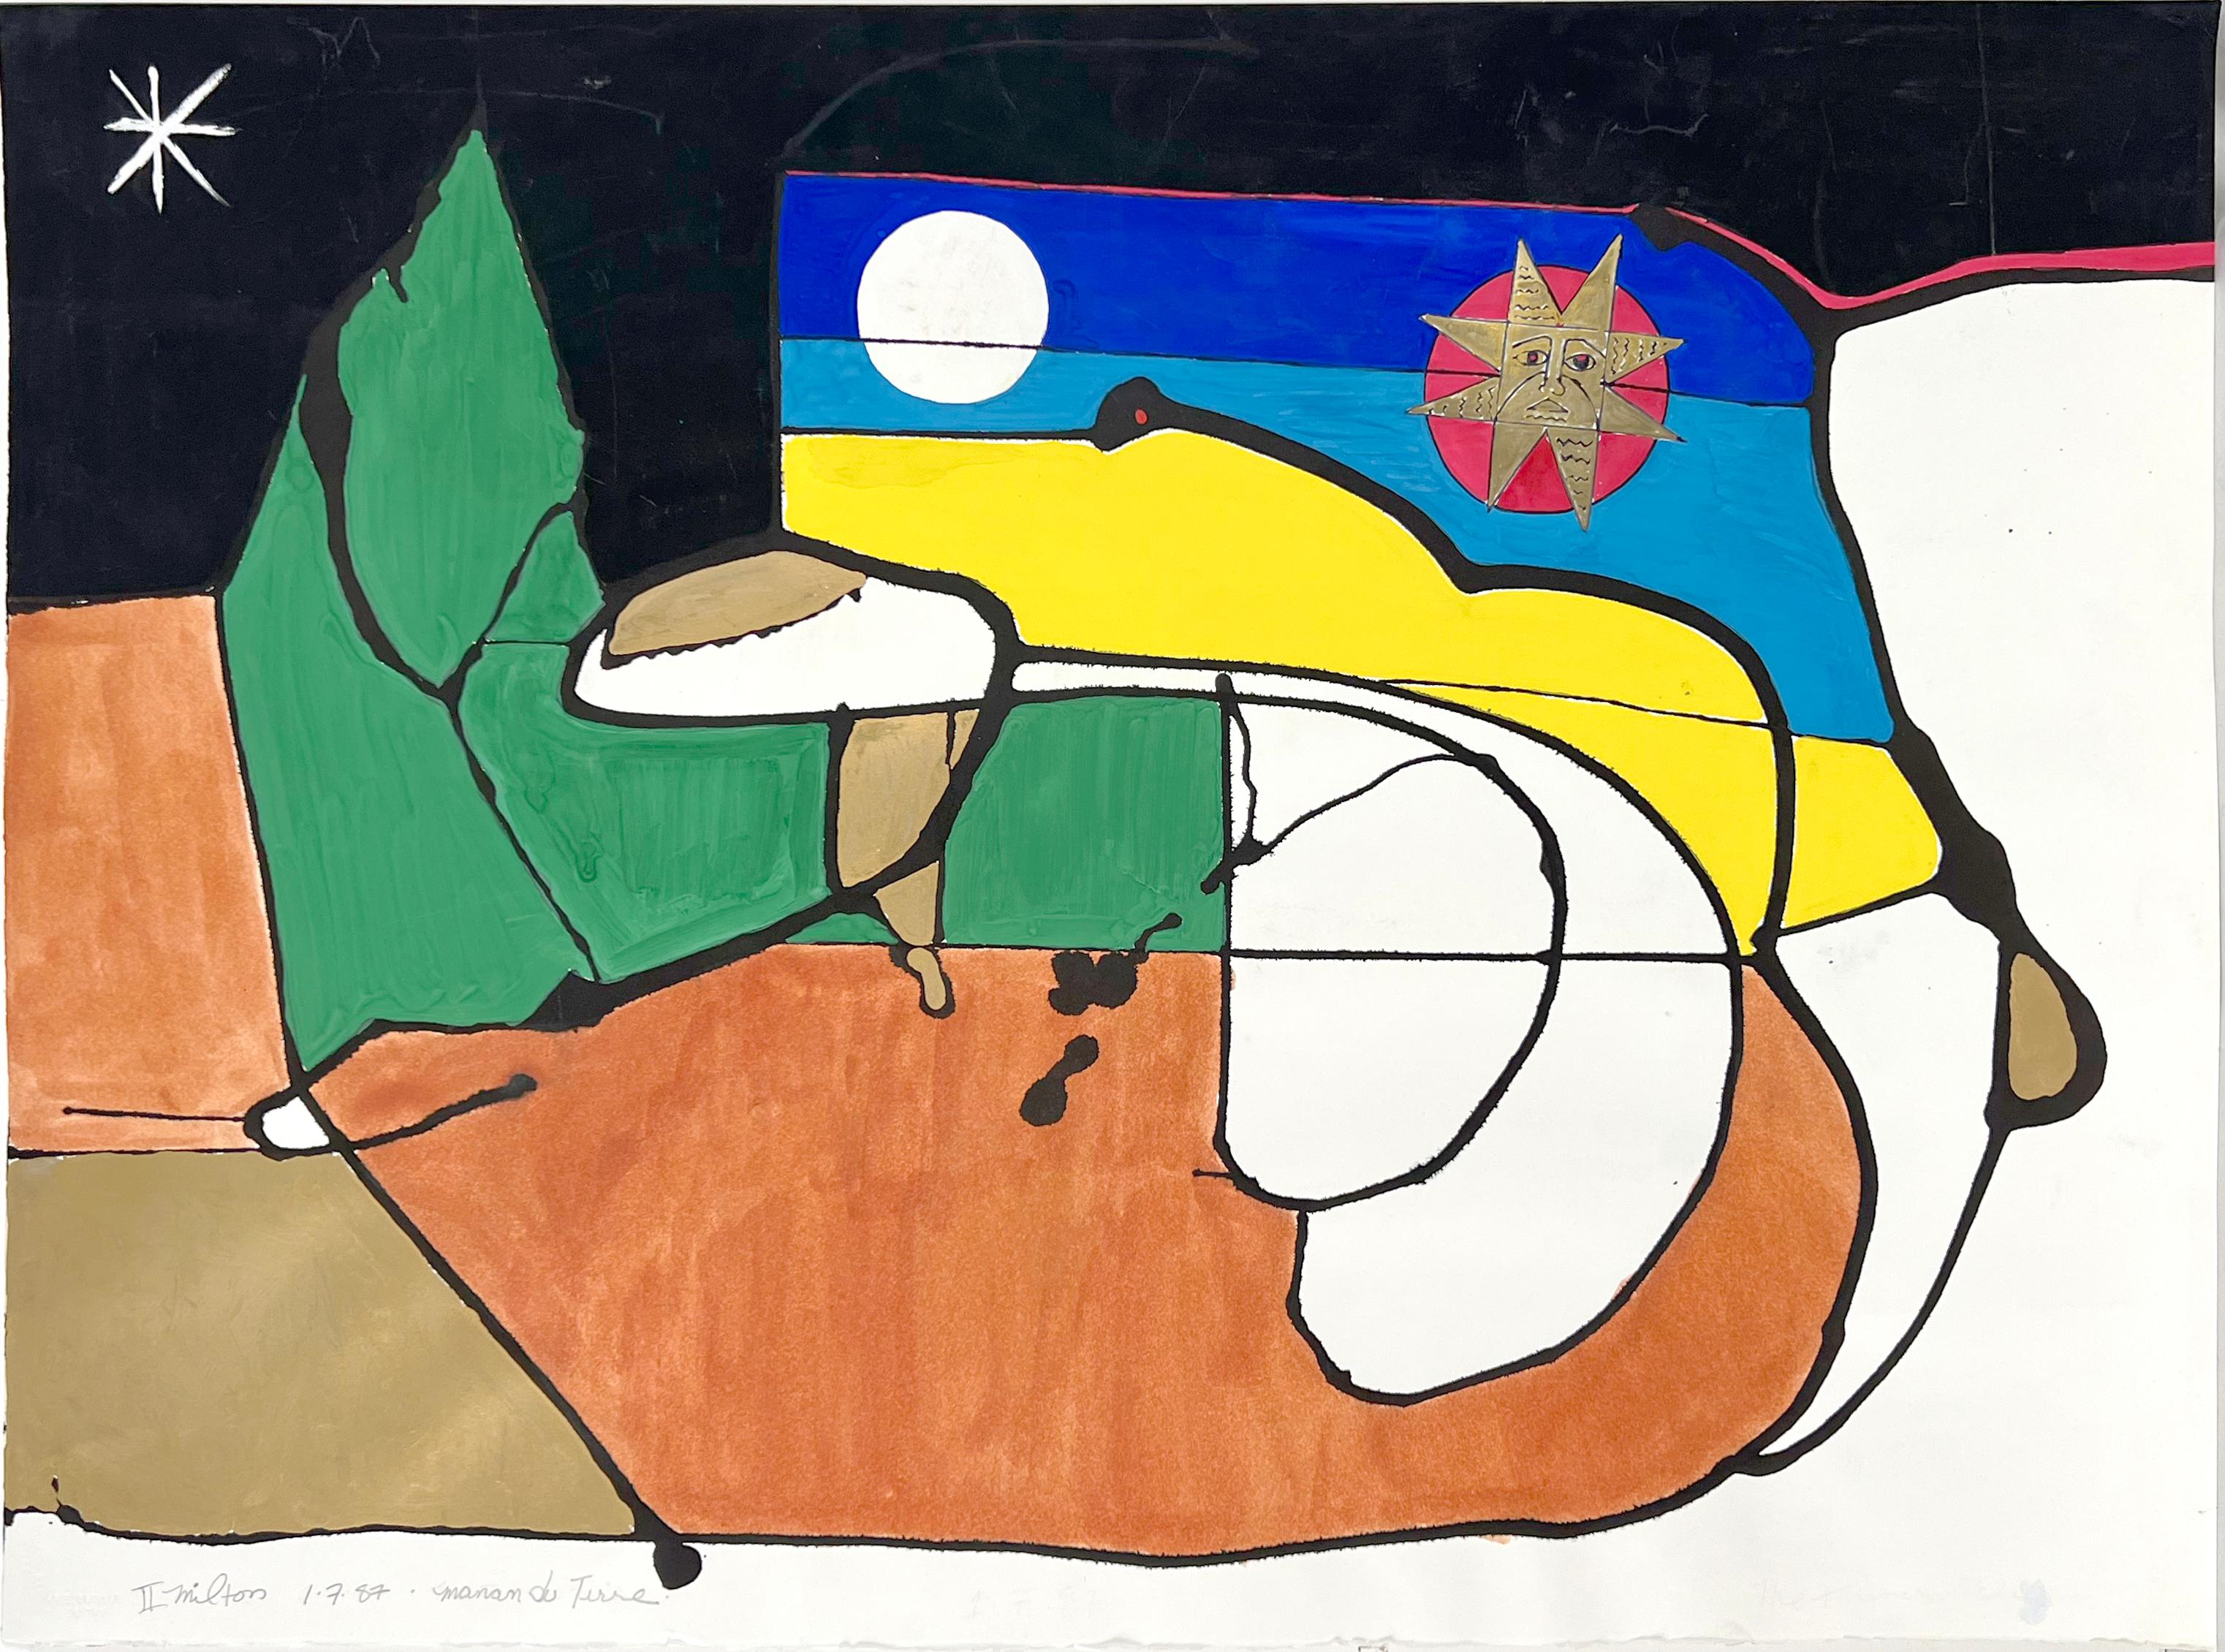 Modernist abstract "Manan du Terre"  by LT Milton 1987
Abstract landscape on paper by Milton (American, 20th century). Bright colors in Gouache and Acrylic paints. A bold green mountain above and landscape titled Manan of the Earth and also titled